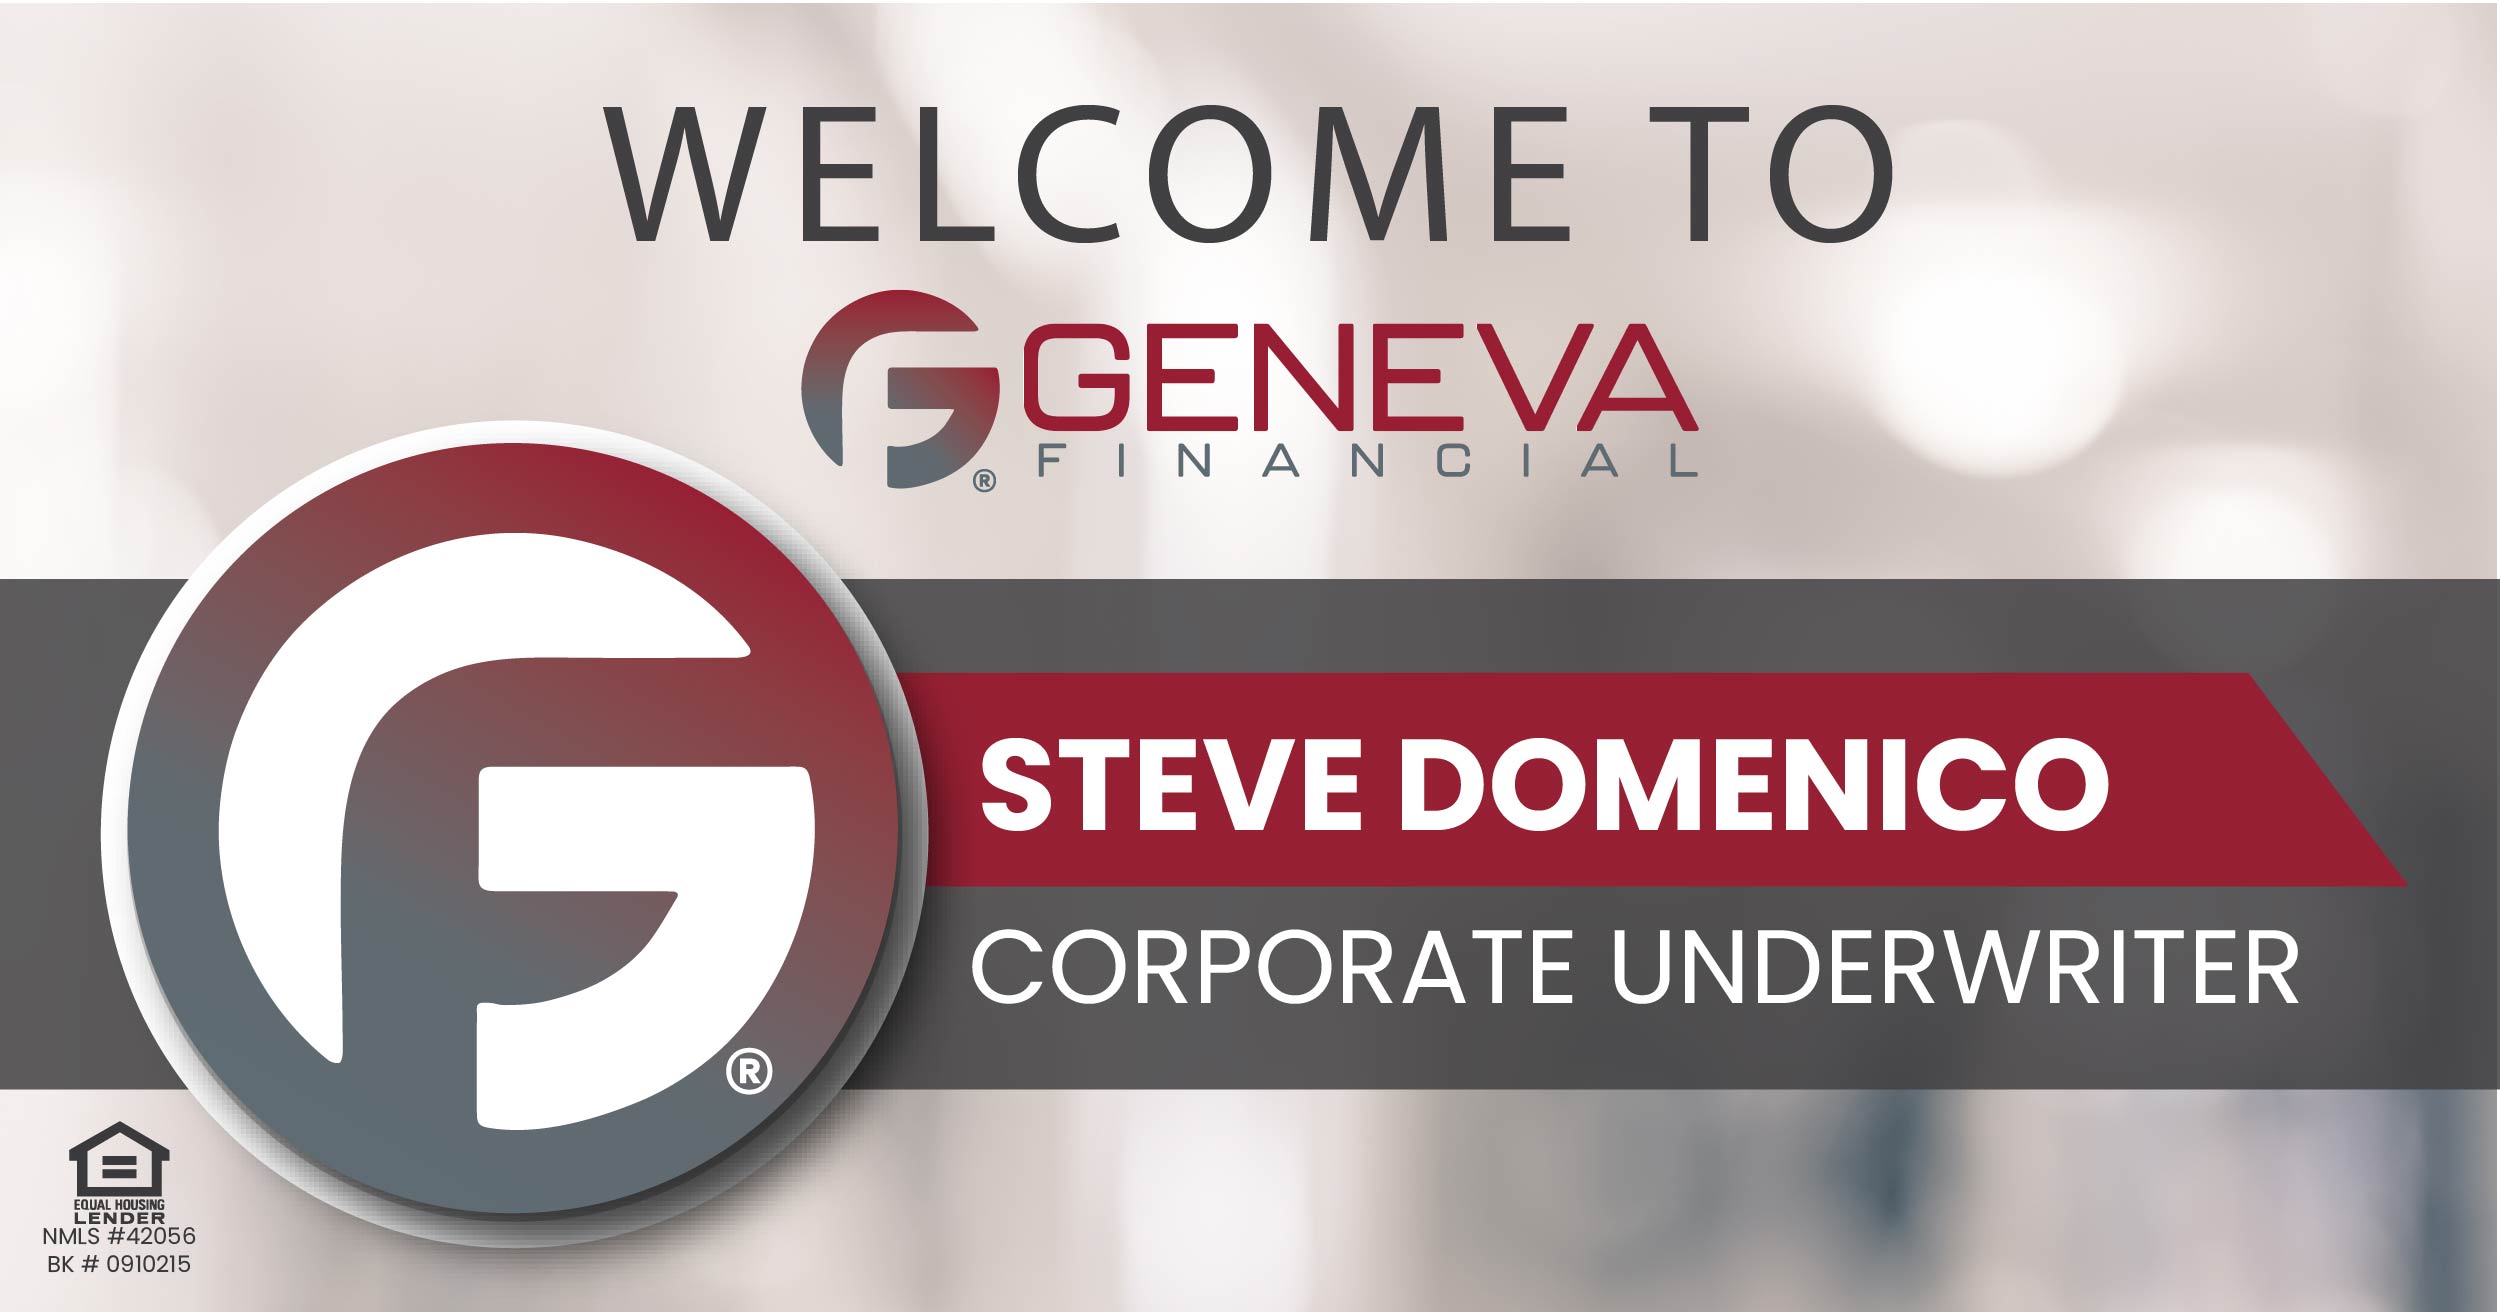 Geneva Financial Home Loans Welcomes New Underwriter Steve Domenico to Geneva Corporate – Home Loans Powered by Humans®.